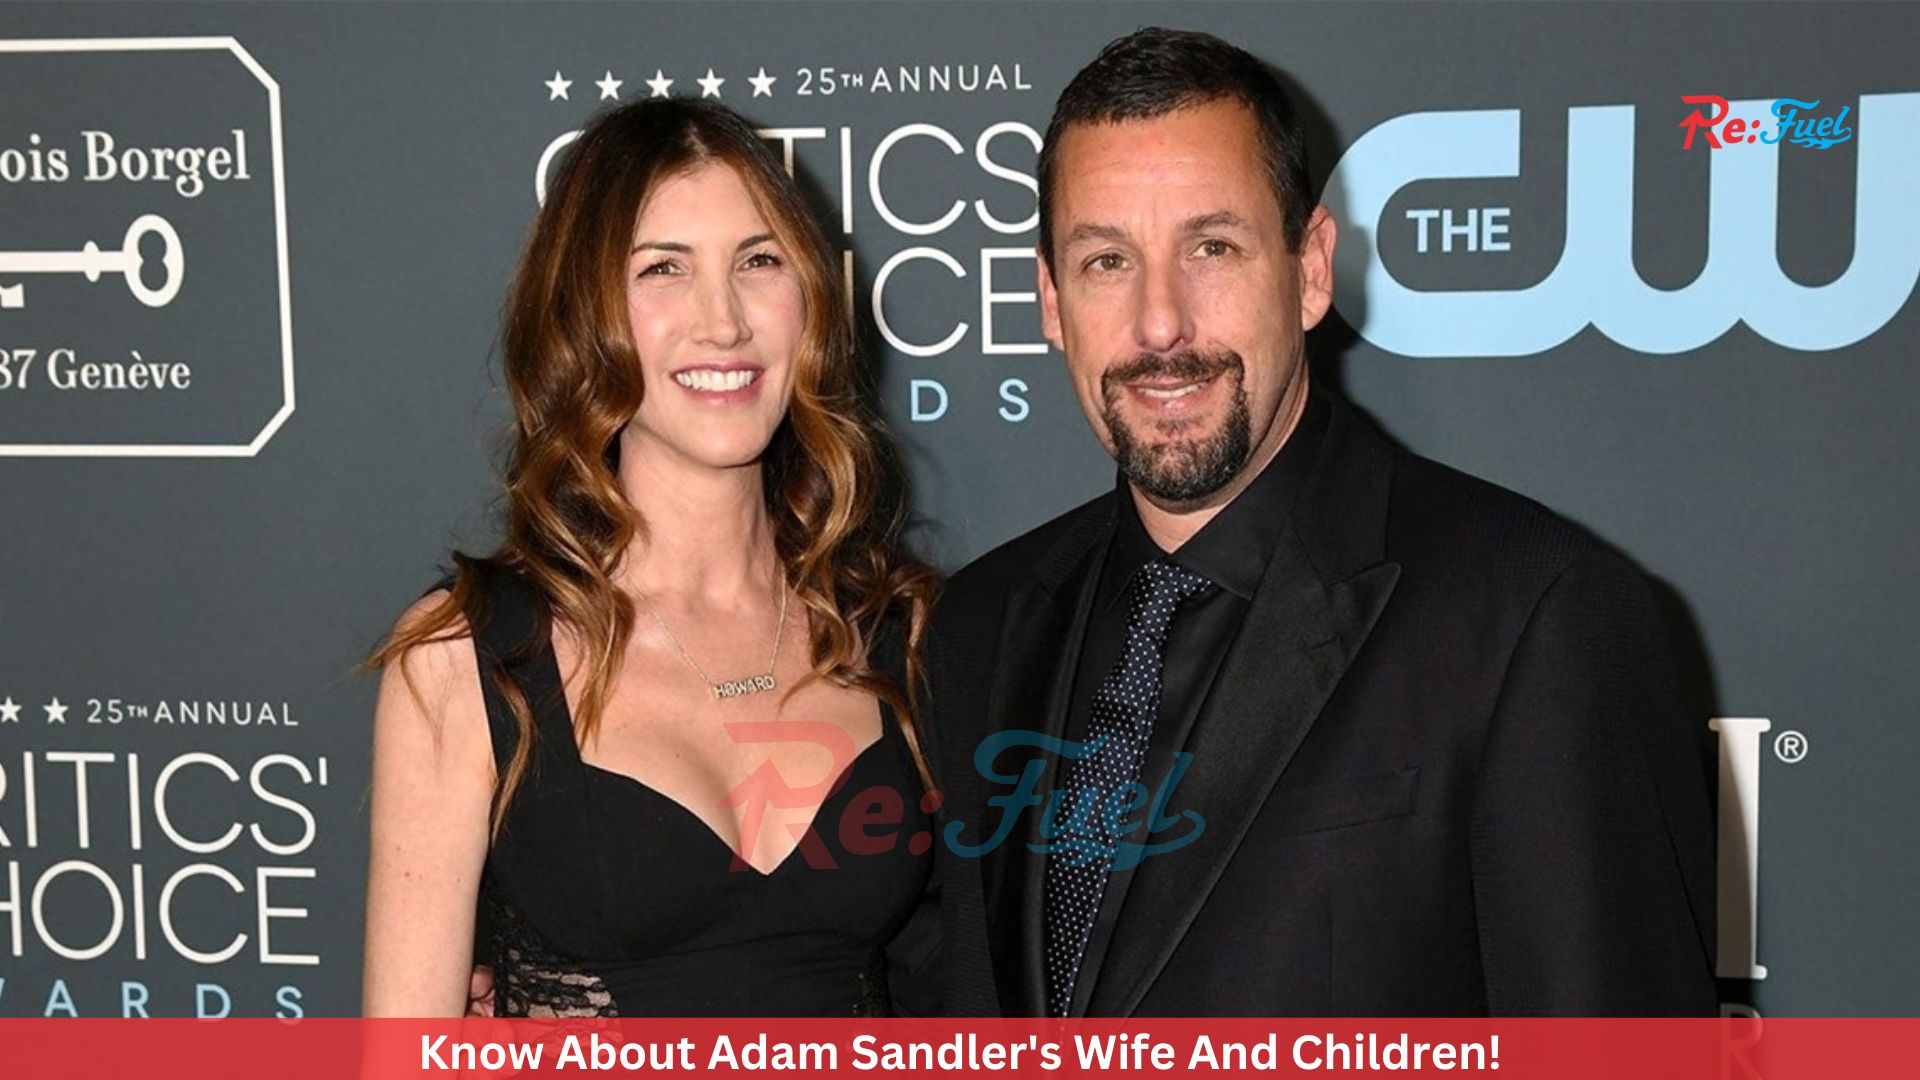 Know About Adam Sandler's Wife And Children!